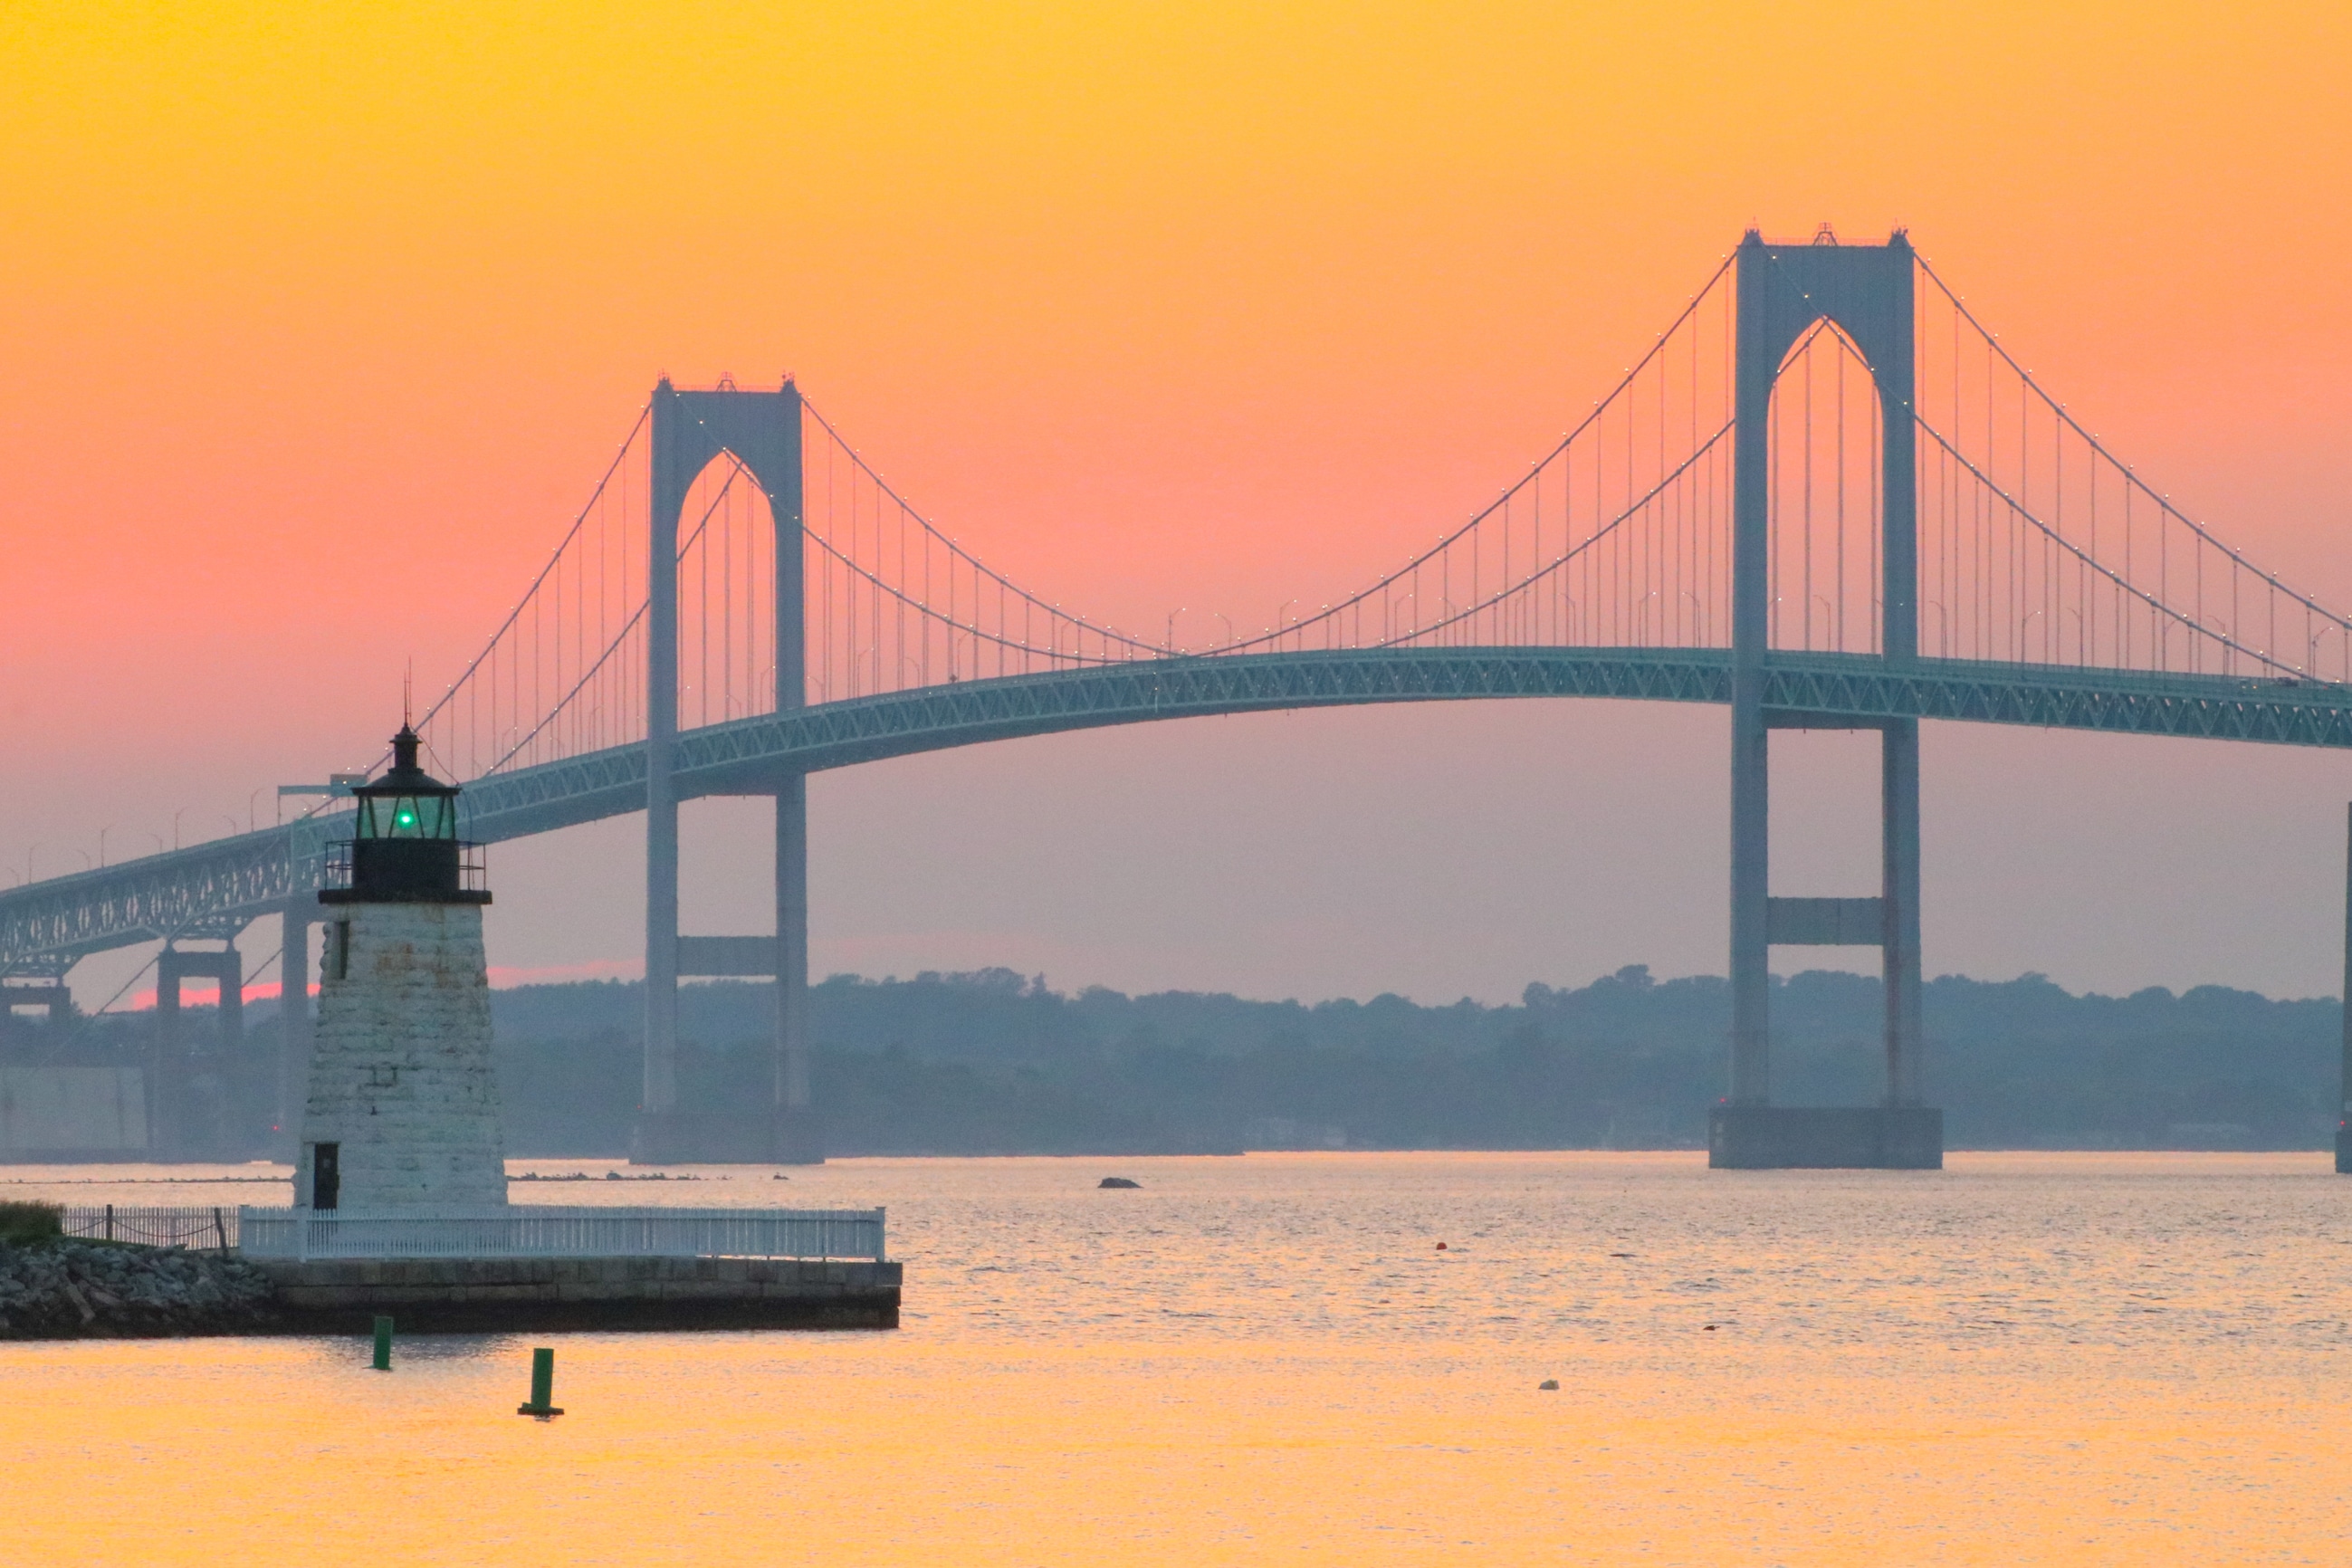 A Rhode Island lighthouse and suspension bridge bathed in the orange-pink light of sunset, symbolizing the protection offered by Rhode Island flood insurance in coastal communities.